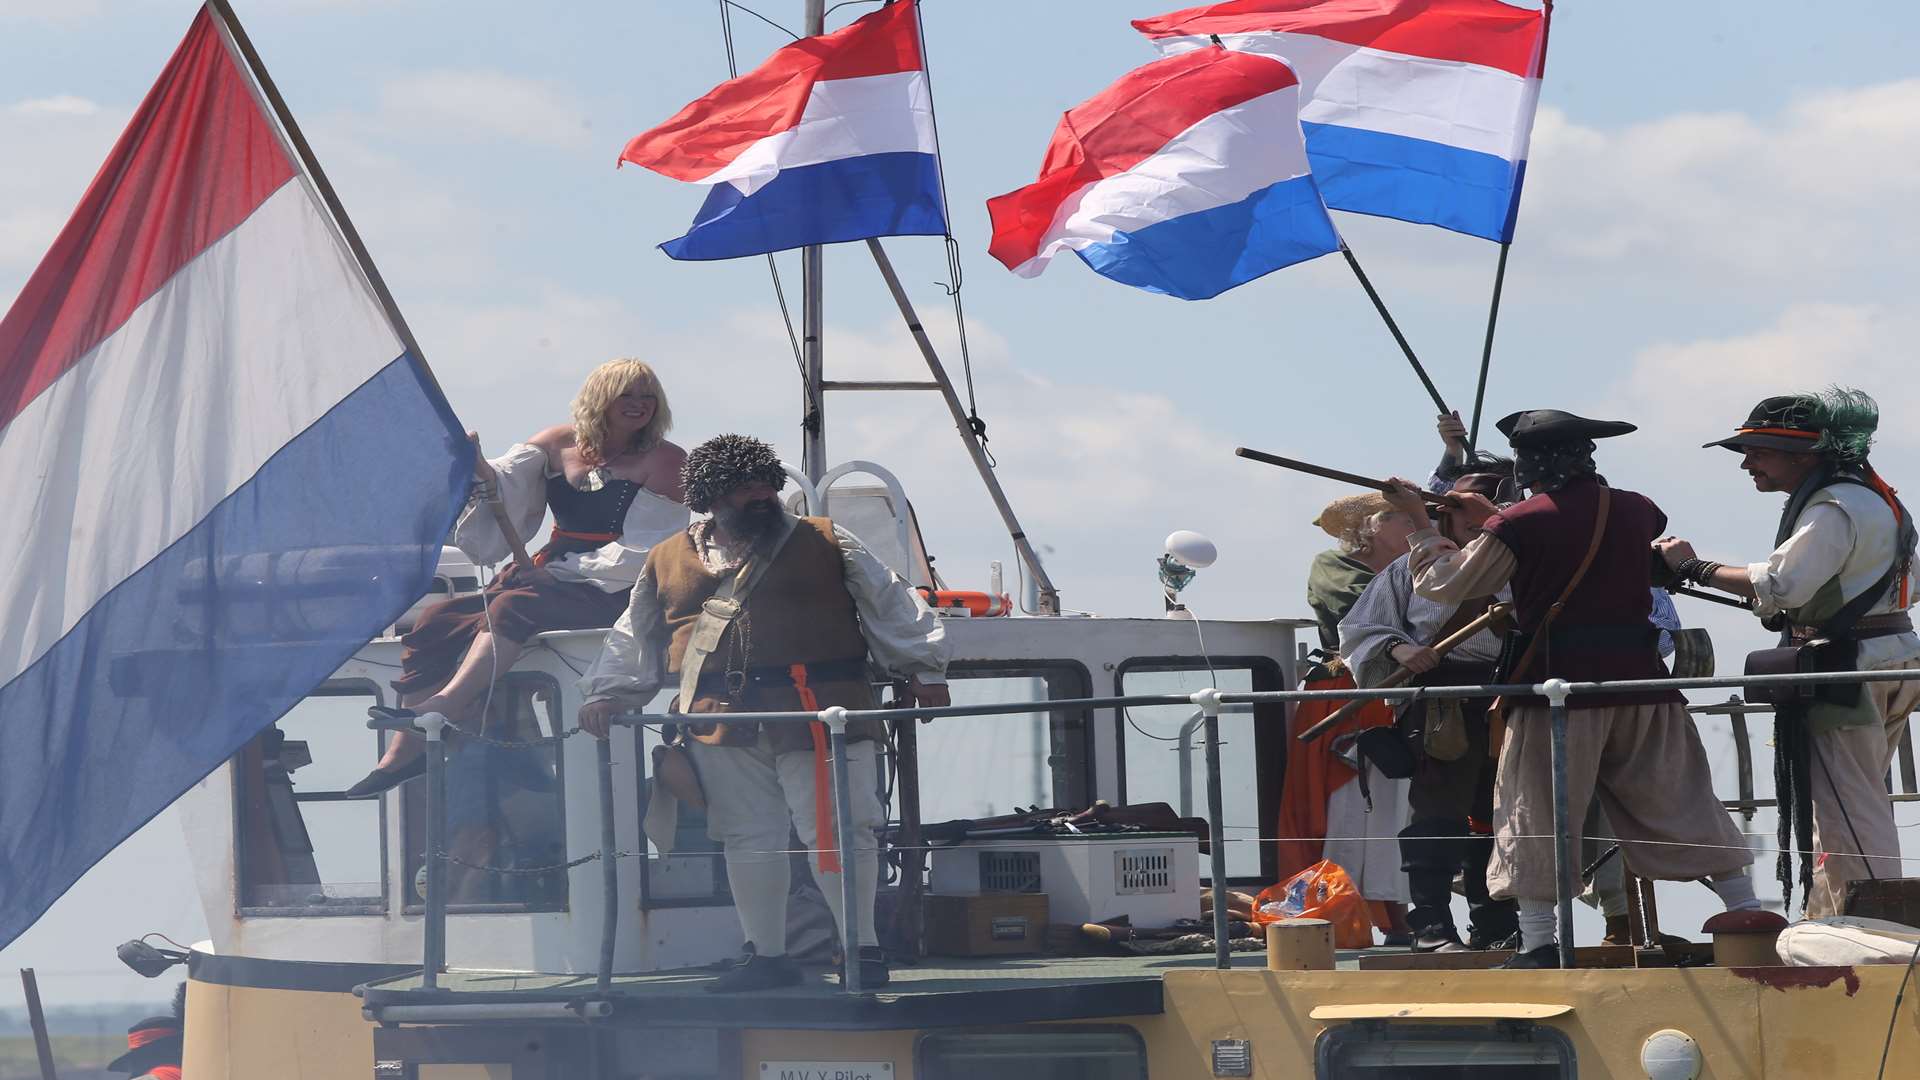 Sheppey Pirates, with Dutch flags flying, reenact a part of the Dutch flotilla invading Queenborough